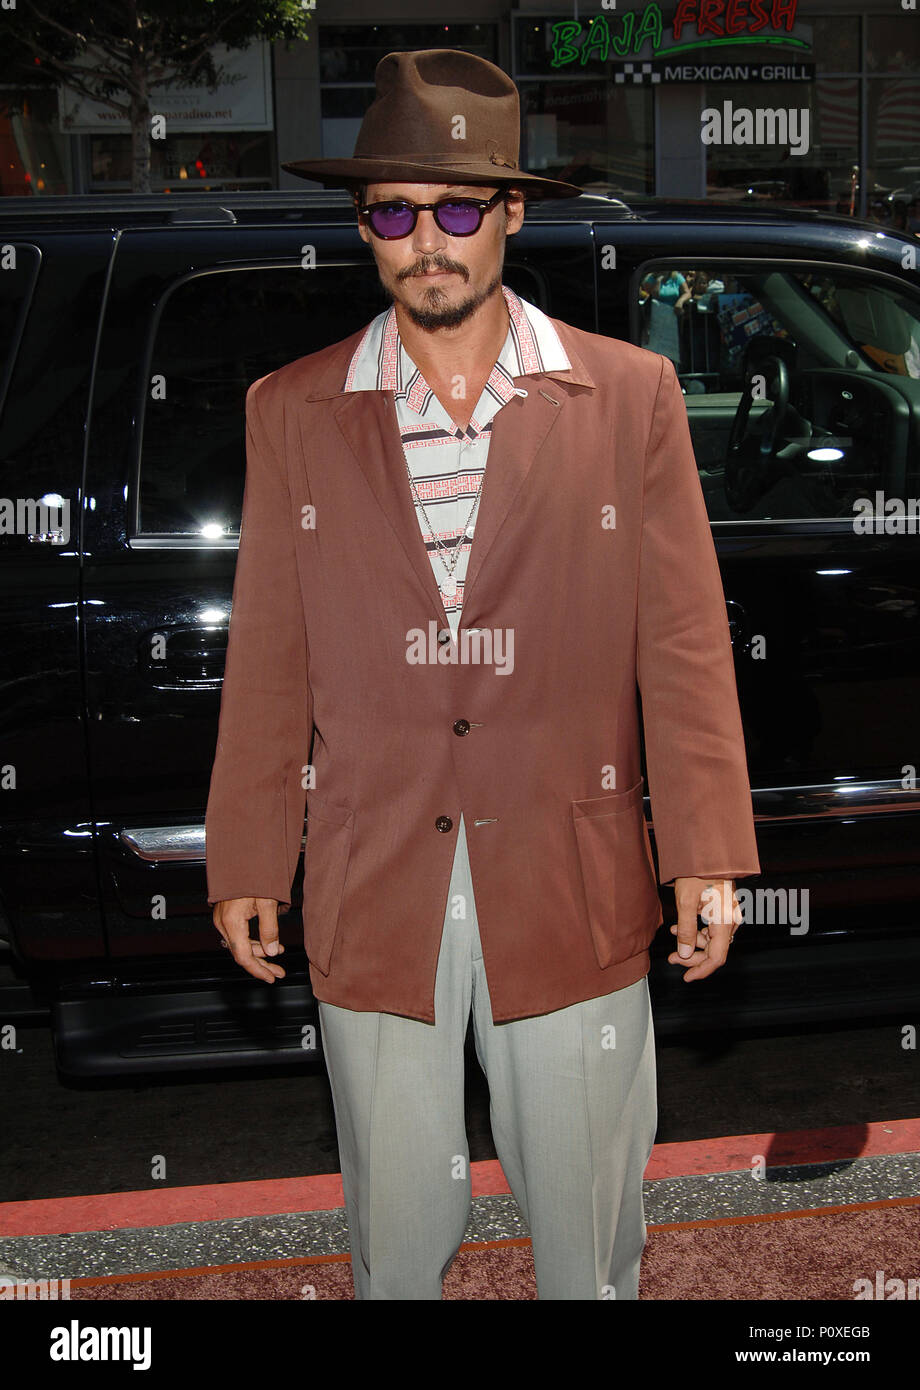 Johnny Depp arriving at the Charlie And The Chocolat Factory Premiere at the Chinese Theatre In Los Angeles. Jyly 10, 2005. 02 DeppJohnny018 Red Carpet Event, Vertical, USA, Film Industry, Celebrities,  Photography, Bestof, Arts Culture and Entertainment, Topix Celebrities fashion /  Vertical, Best of, Event in Hollywood Life - California,  Red Carpet and backstage, USA, Film Industry, Celebrities,  movie celebrities, TV celebrities, Music celebrities, Photography, Bestof, Arts Culture and Entertainment,  Topix, vertical, one person,, from the years , 2003 to 2005, inquiry tsuni@Gamma-USA.com  Stock Photo